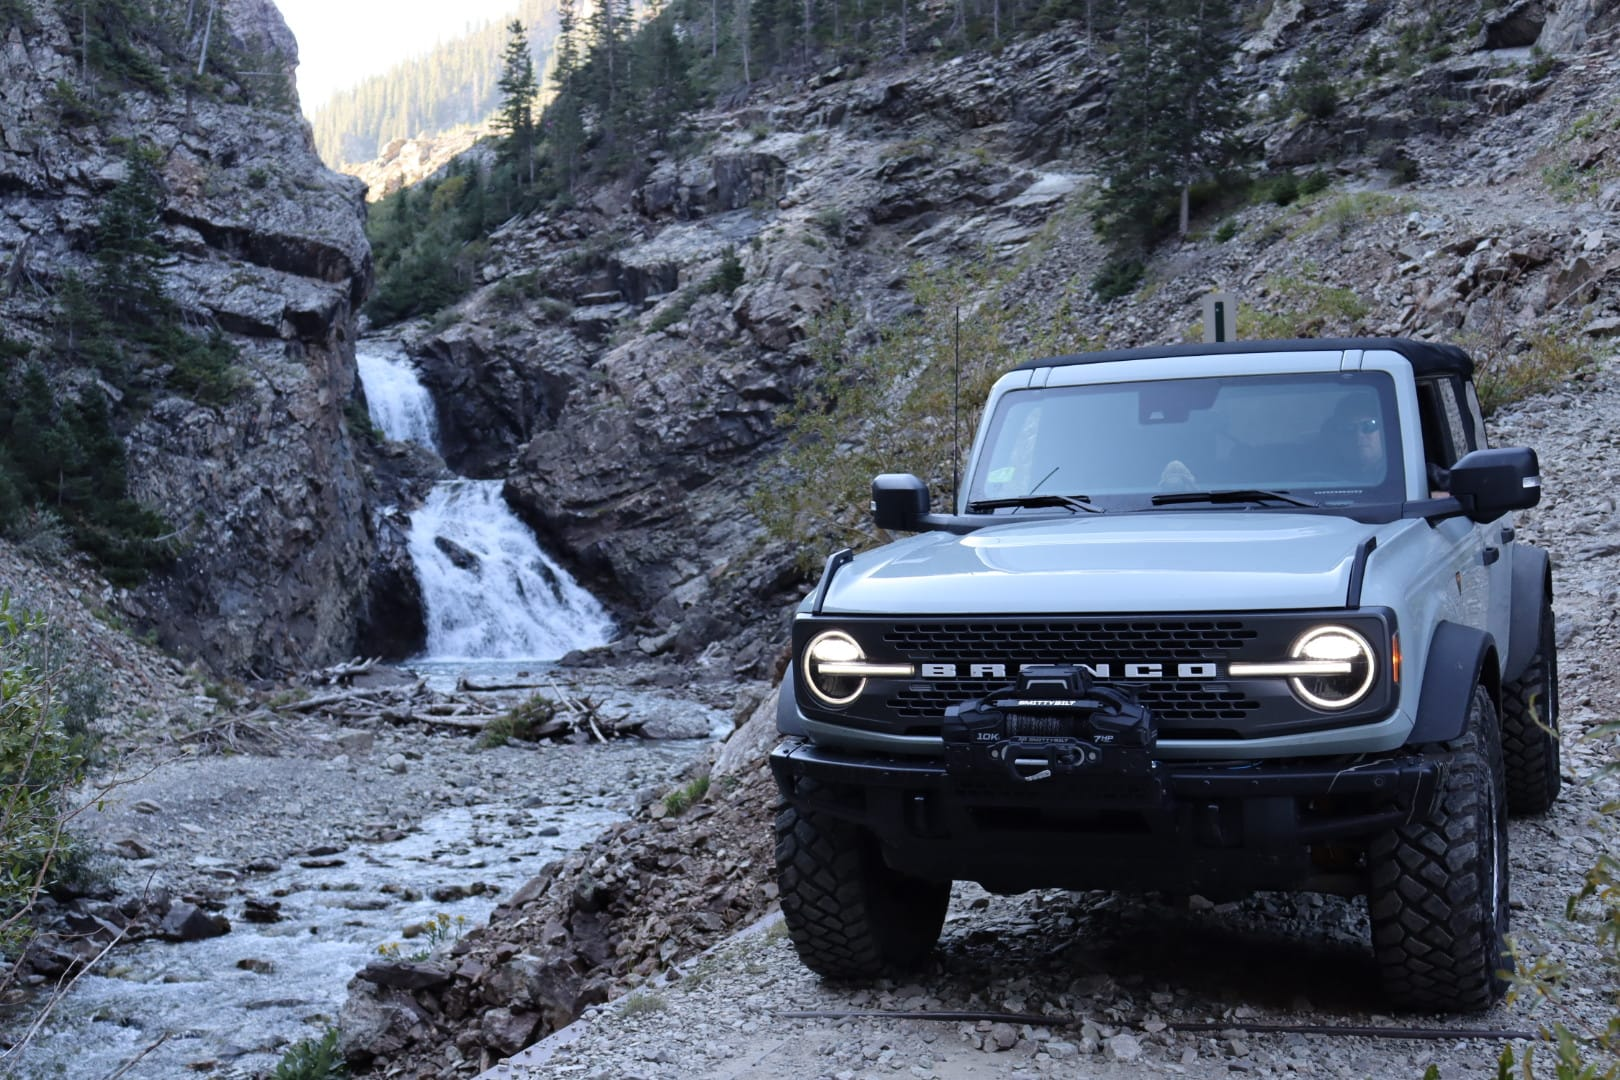 Ford Bronco Let's see your favorite trail photos! 1679696593968